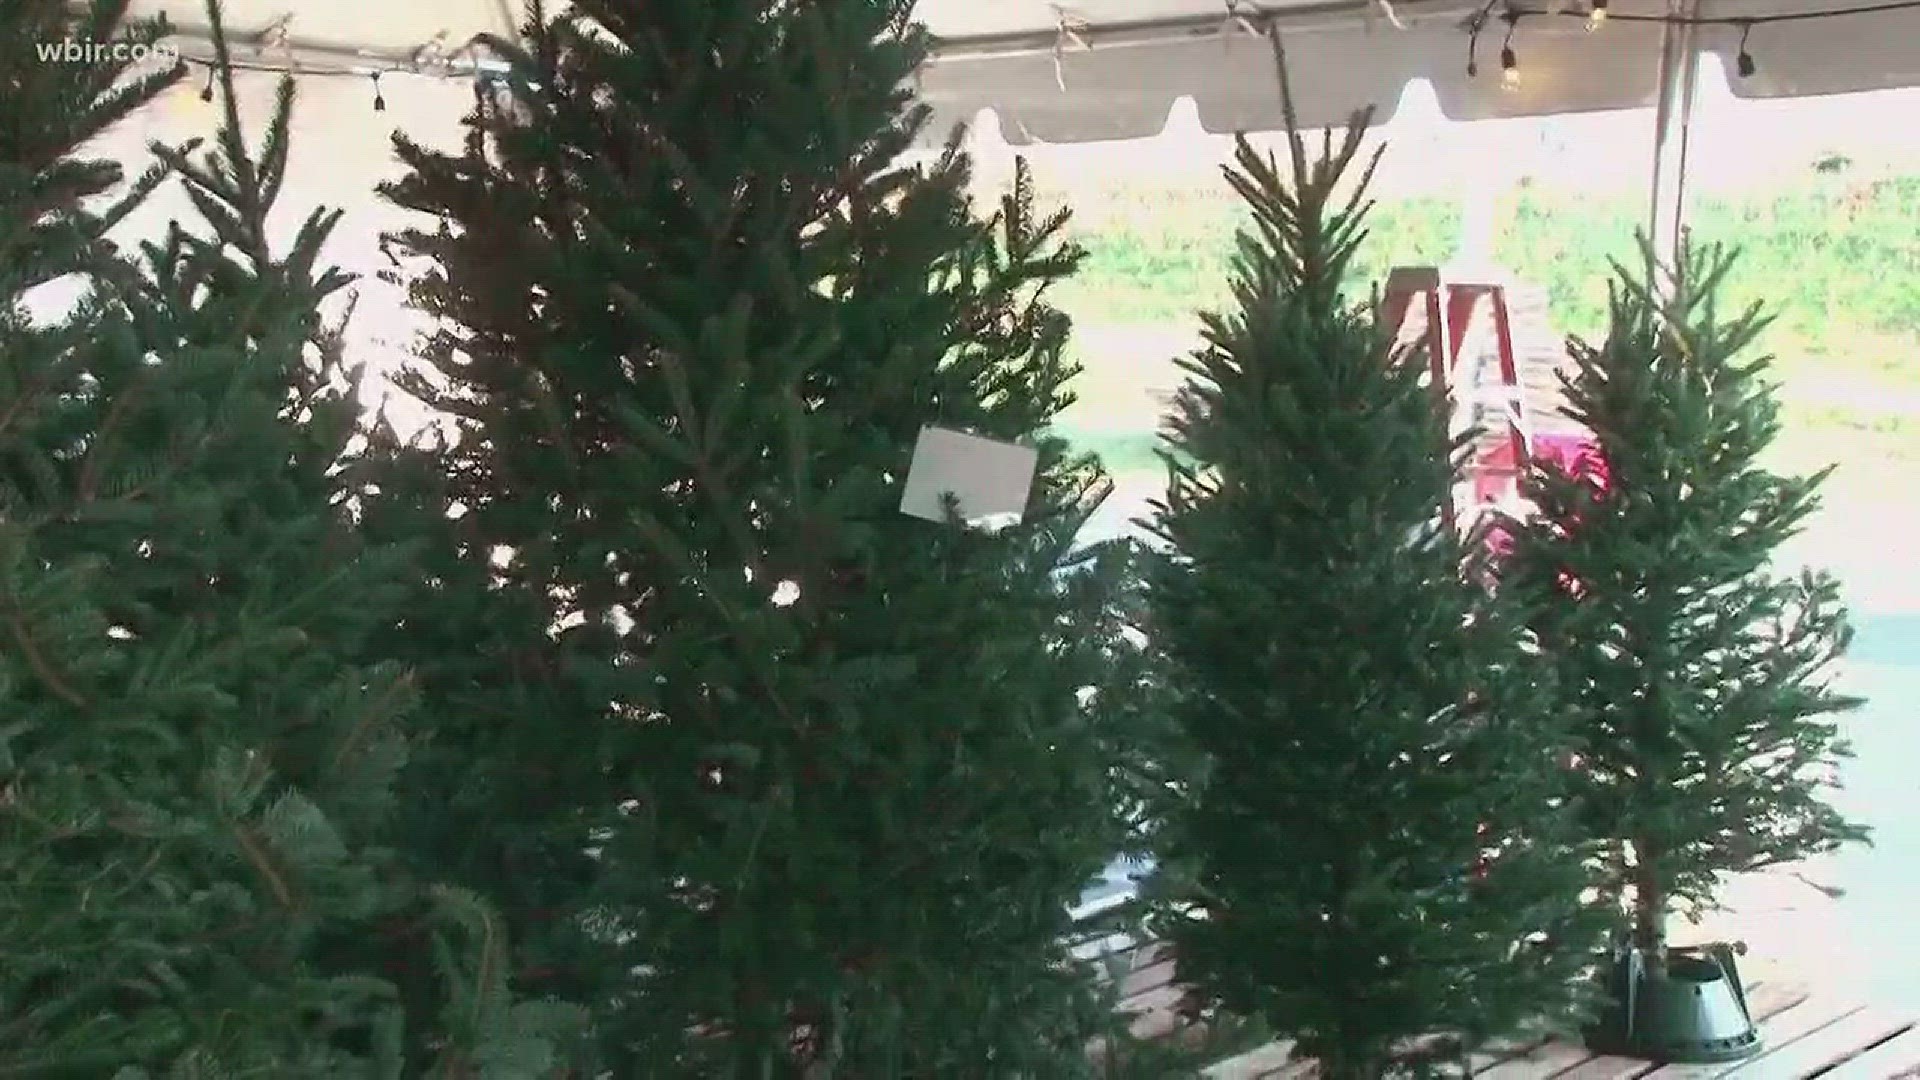 Dec. 4, 2017: The Freedom House Church of God is selling Christmas trees with proceeds going to benefit Second Harvest Food Bank of East Tennessee.